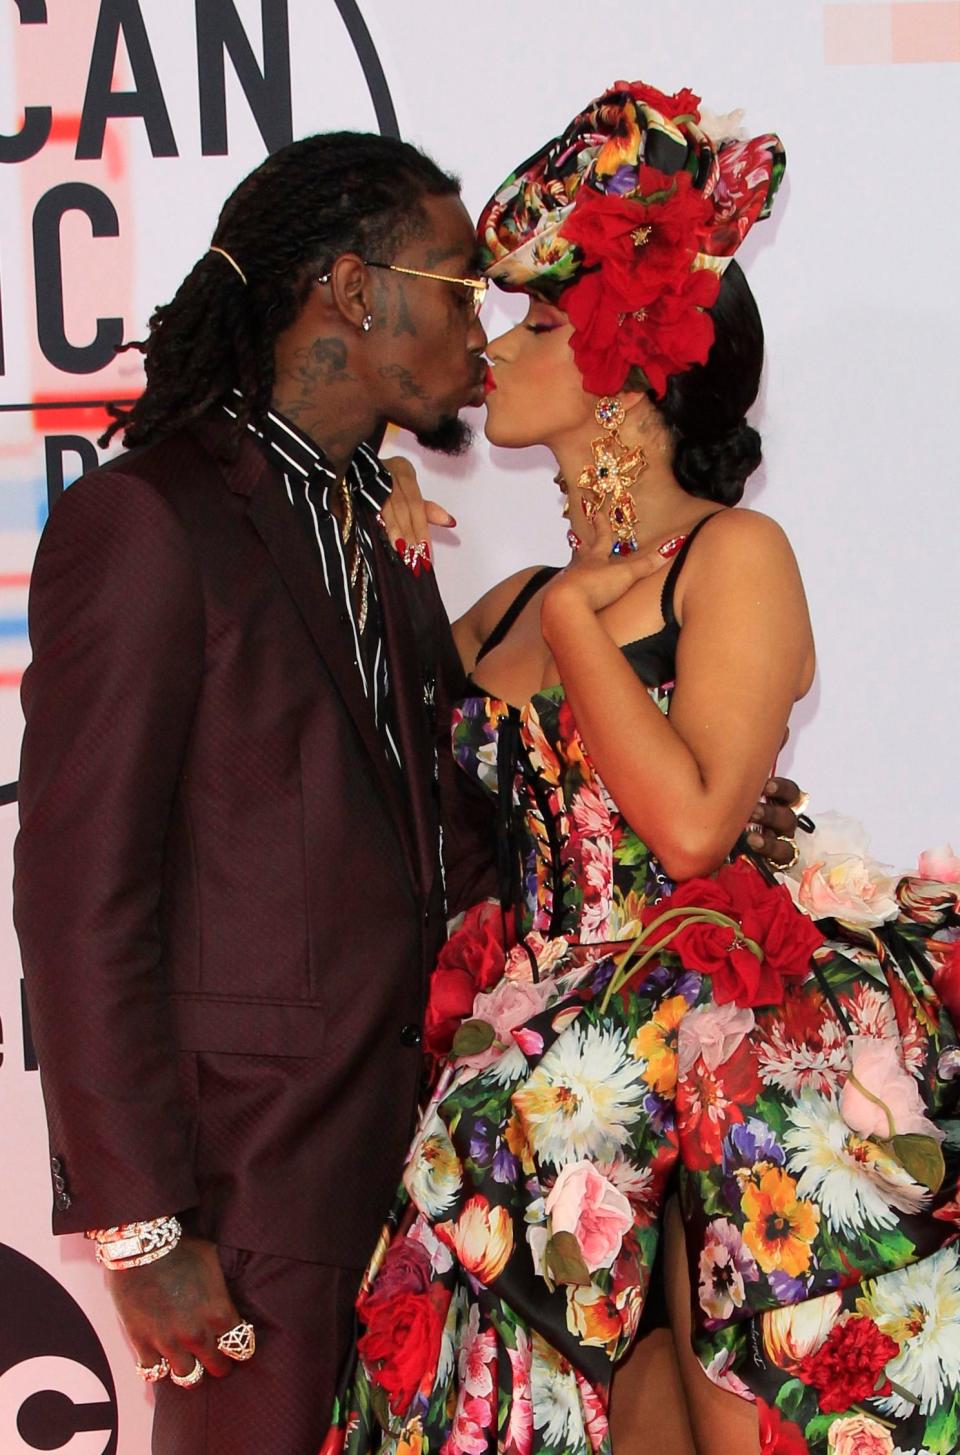 Are Cardi B and Offset Still Together? The 'WAP' Singer Explains Why She Called Off Their Divorce